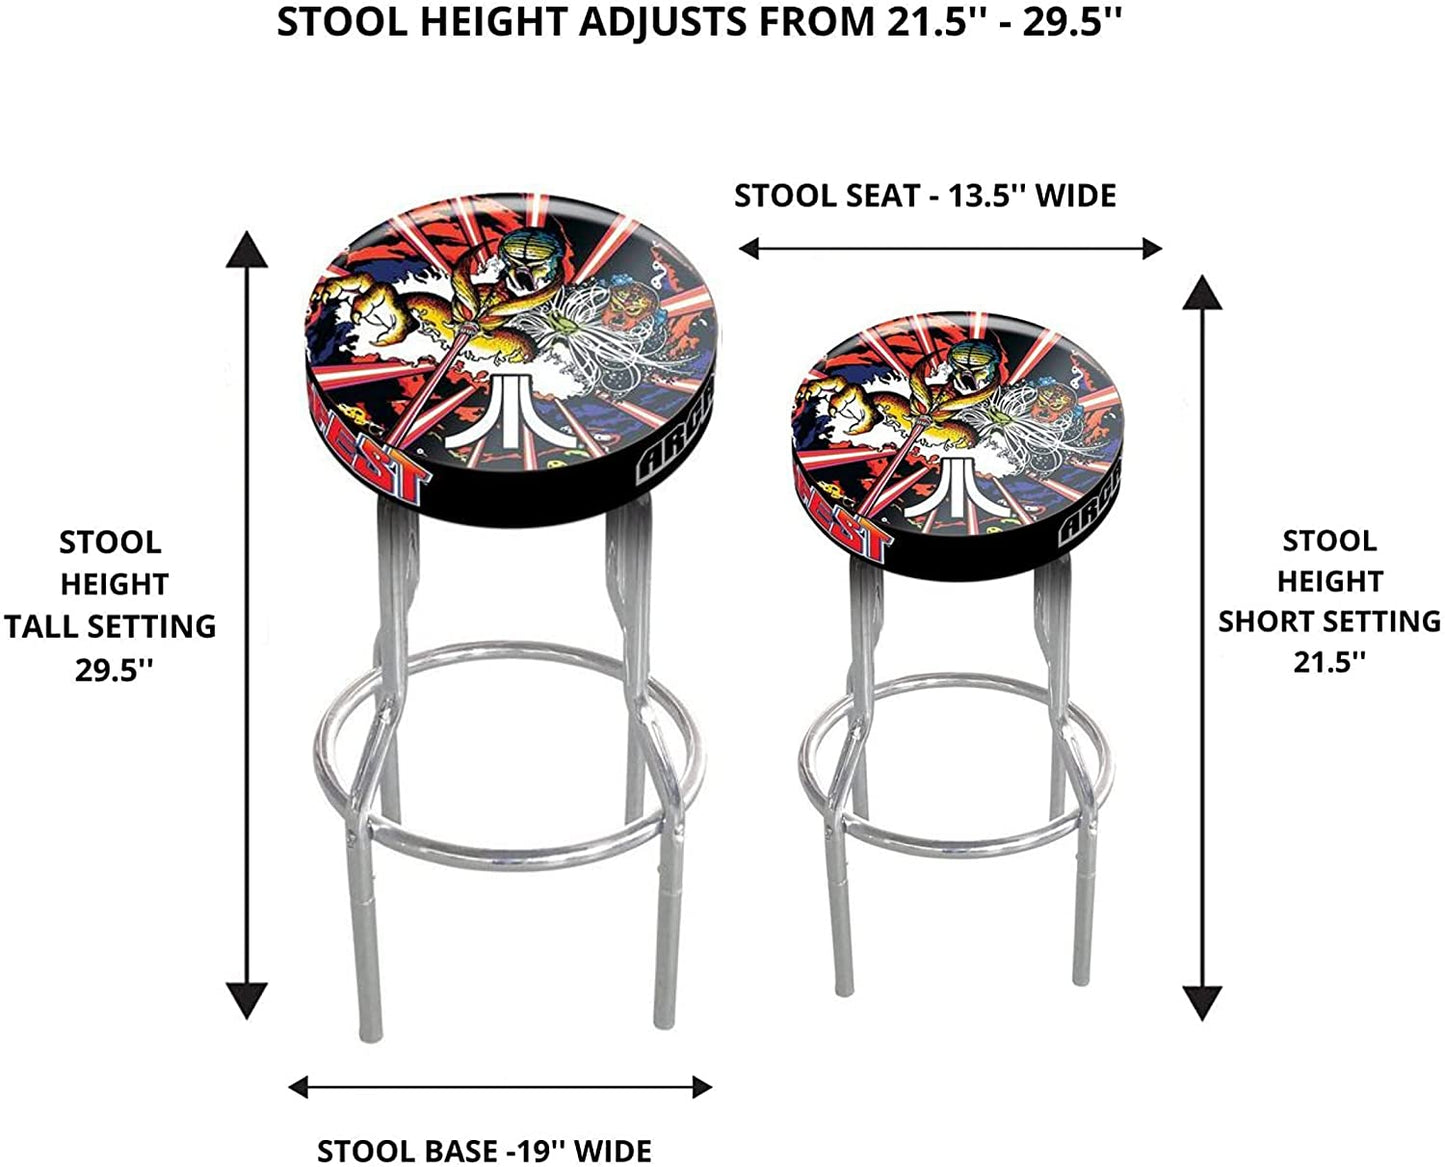 Bar Stool Adjustable Height 21.5 inches to 29.5 inches (Atari Tempest)